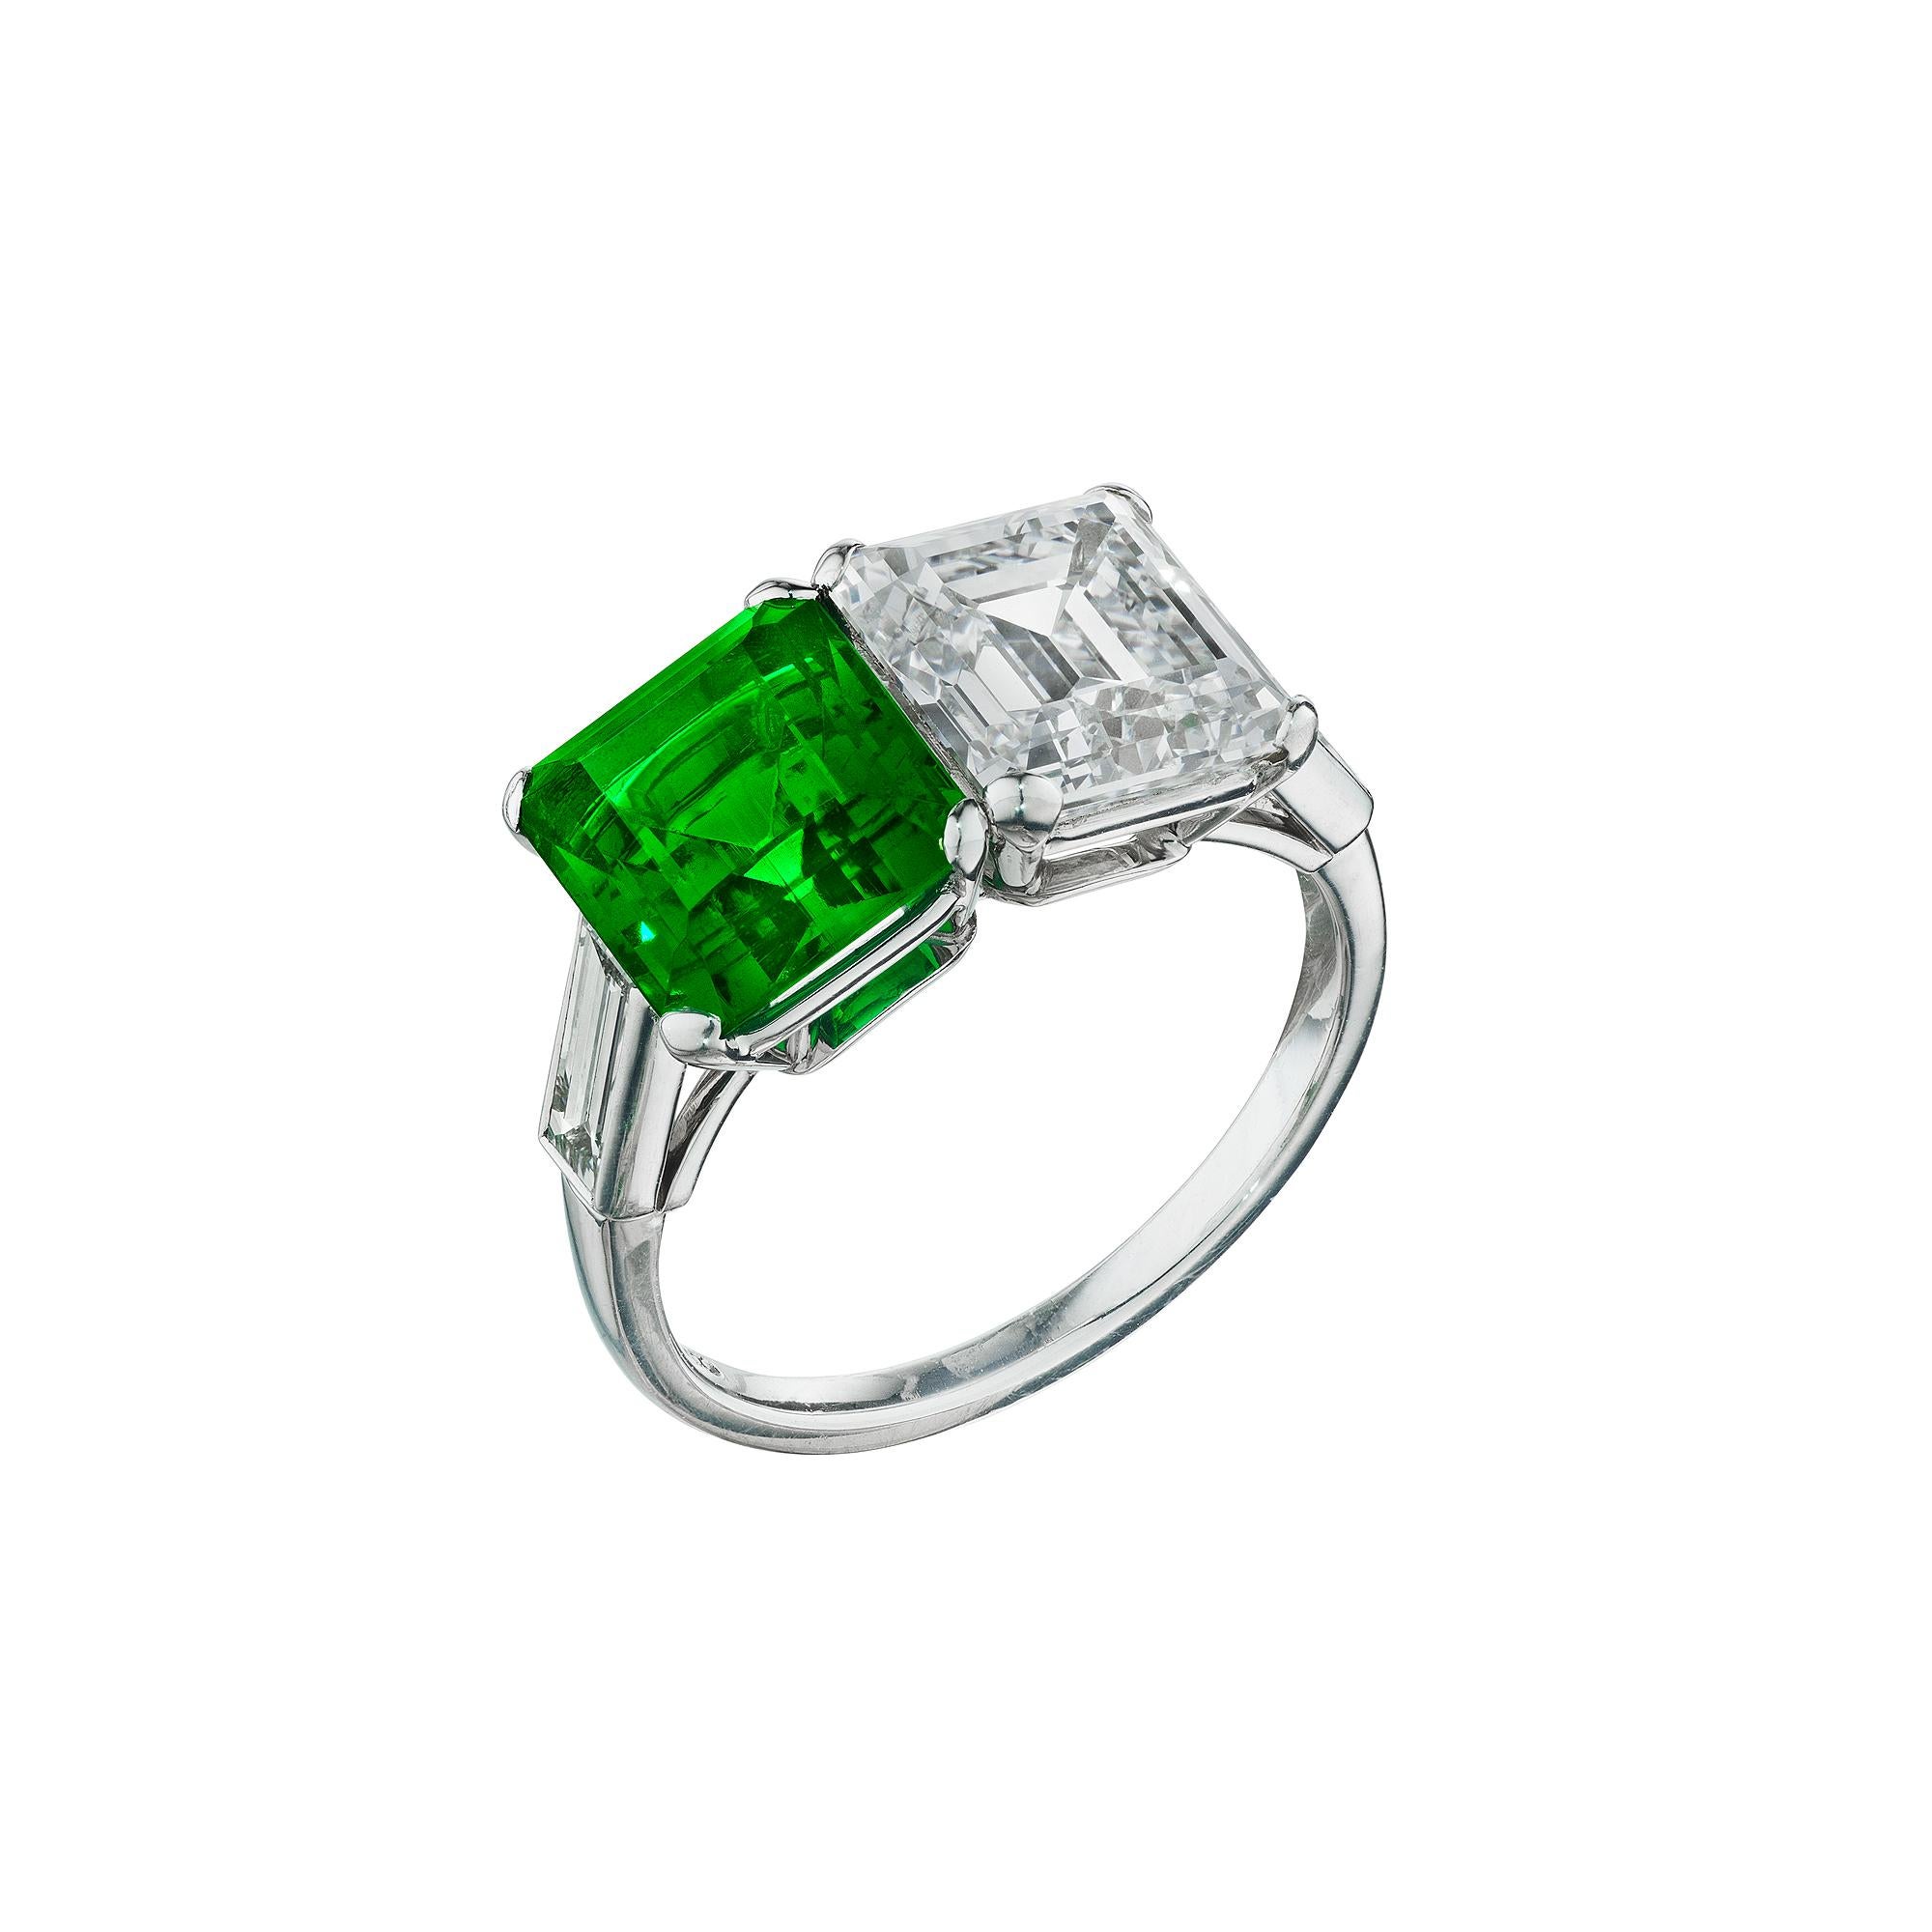 Double your pleasure with this extraordinary natural Columbian emerald and diamond two-stone handmade platinum ring. With a 2.30 carat luscious emerald cut emerald and a 2.82 emerald cut white diamond, designed as a perfect marriage, this rare